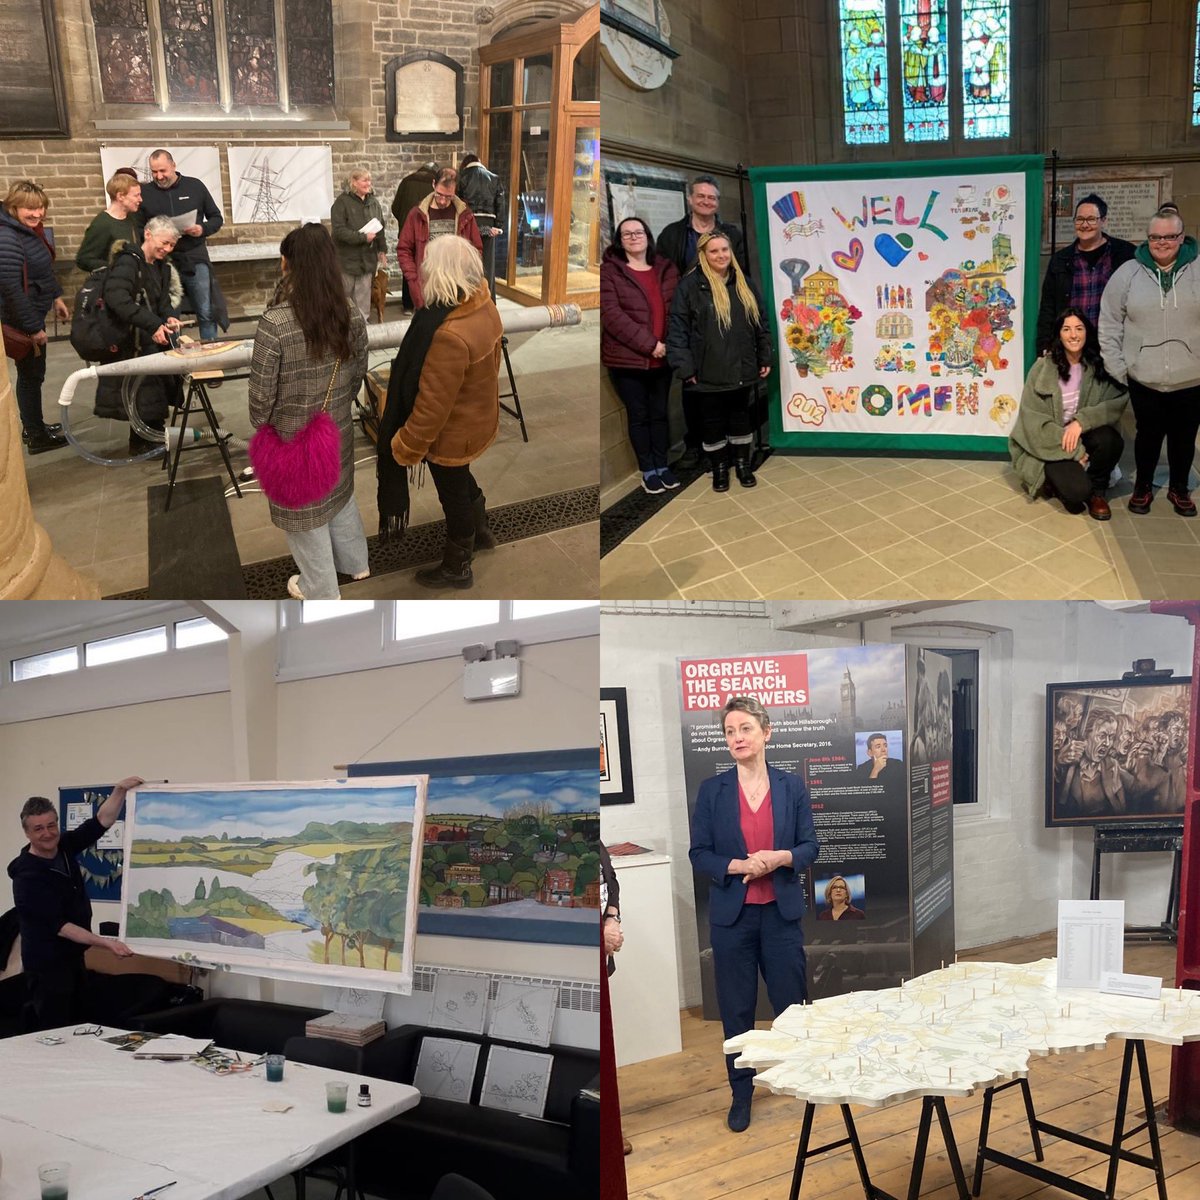 It’s been an amazing first 4 months of @OurYear2024 activities with wonderful groups and organisations @WakeCathedral @WellWomenCentre @EdgelandsArts #FriendsofFitzwilliamStation @queensmillcas thanks to @MyWakefield #CultureGrantsWFD